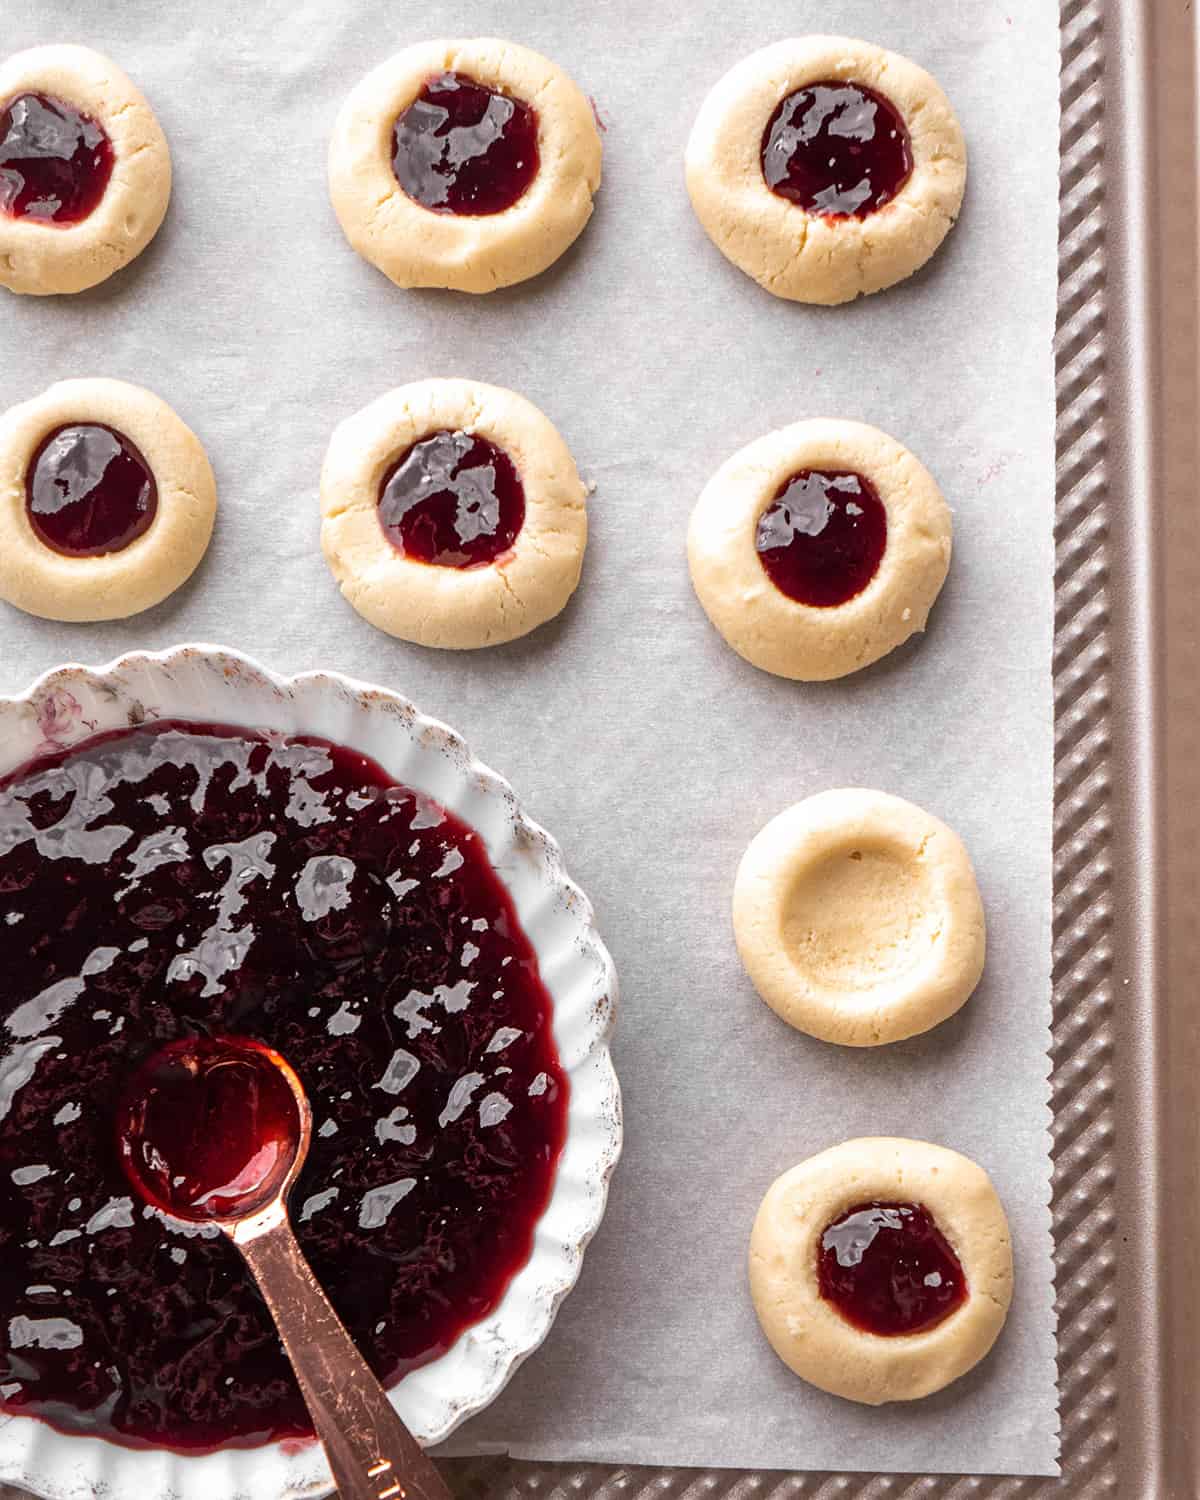 two photos showing how to make Thumbprint Cookies - filling cookies with raspberry jam before baking